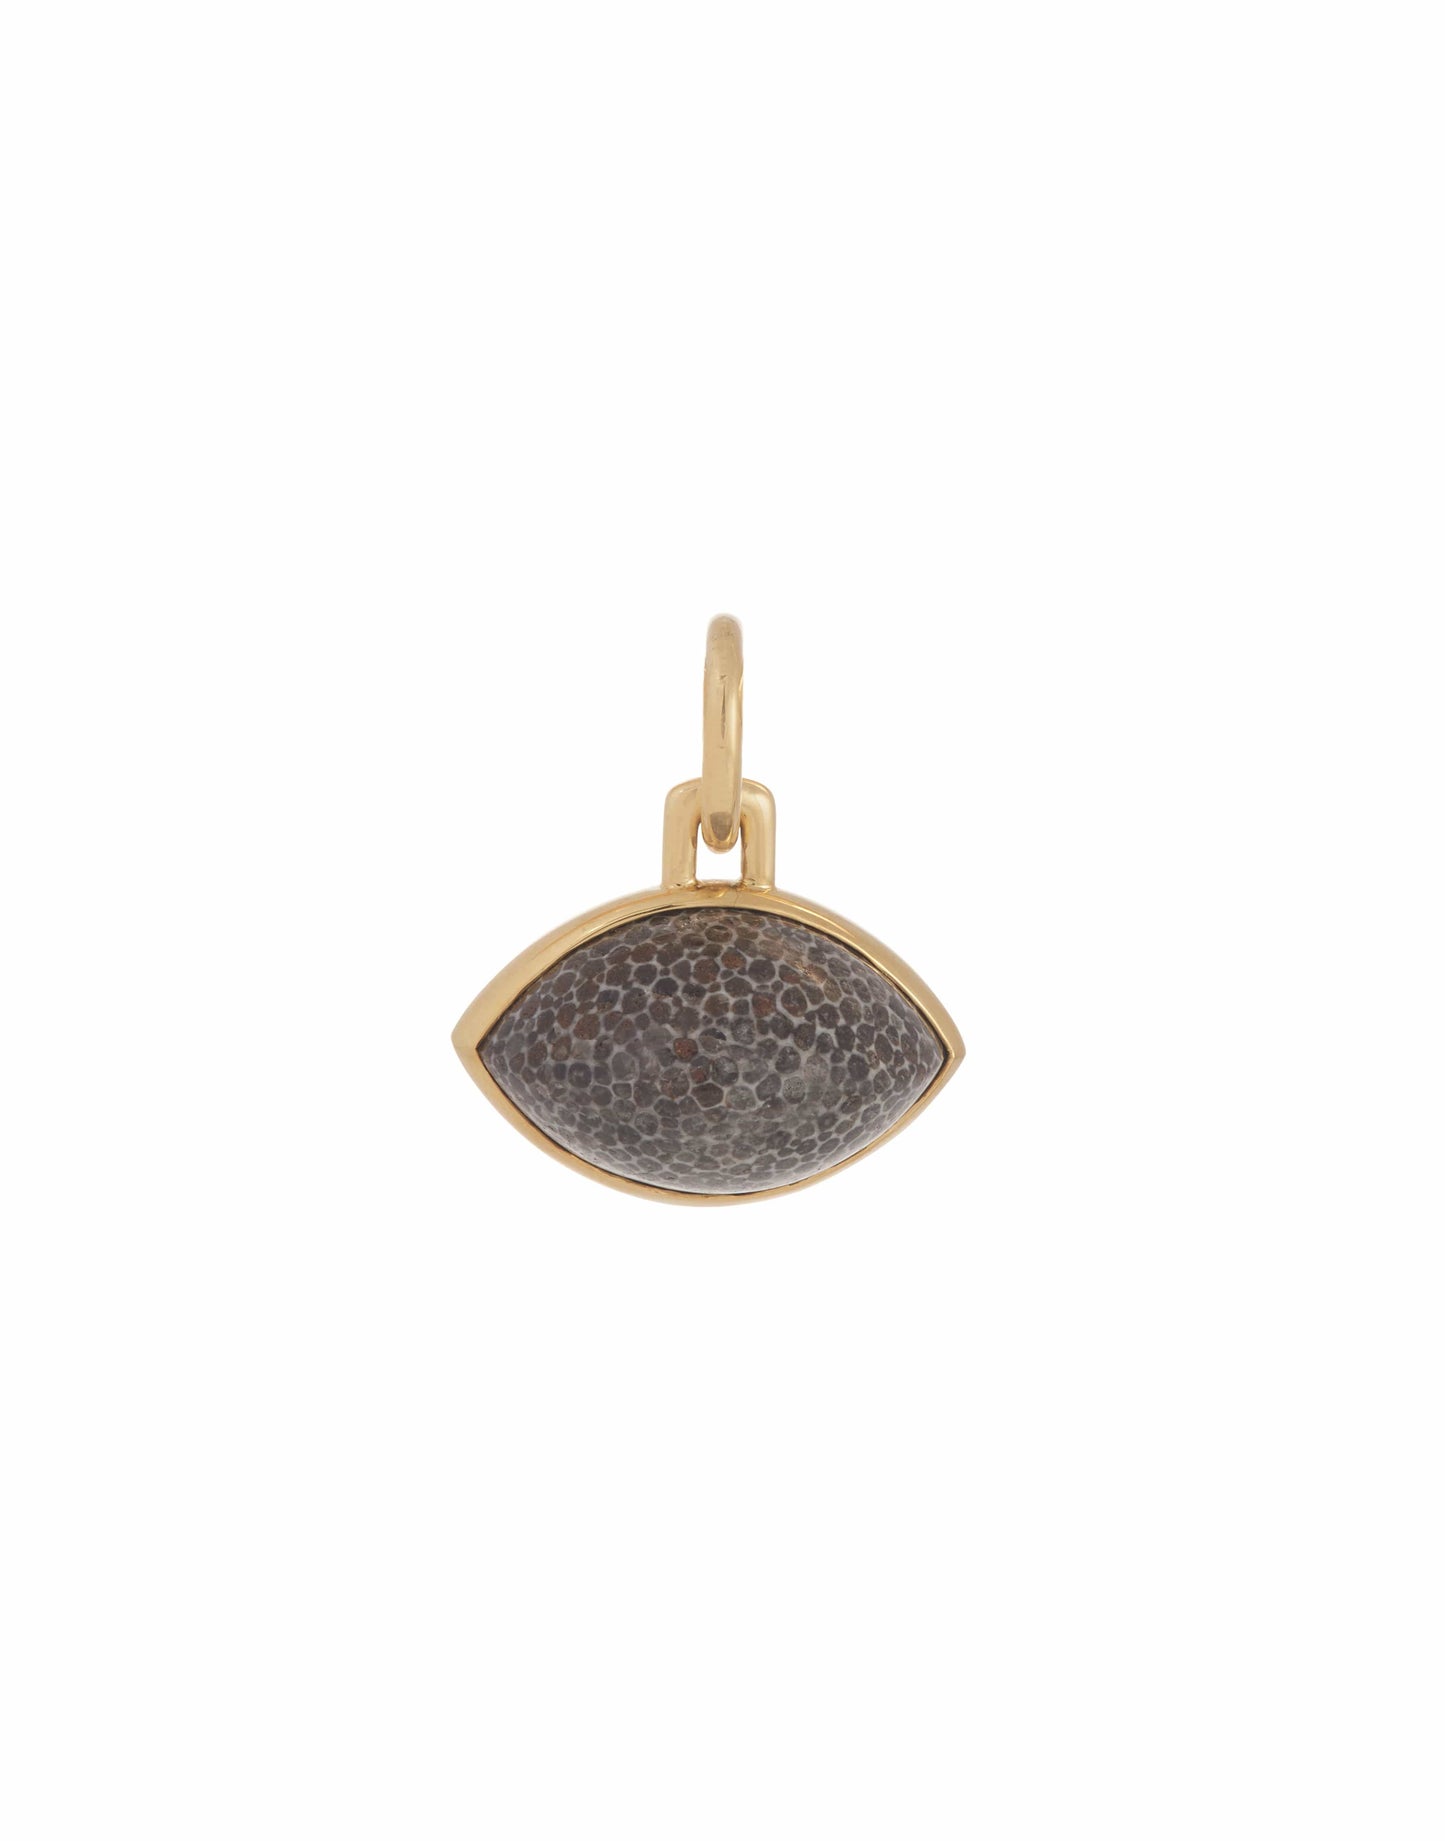 SIDNEY GARBER-Fossilized Coral Pendant-YELLOW GOLD